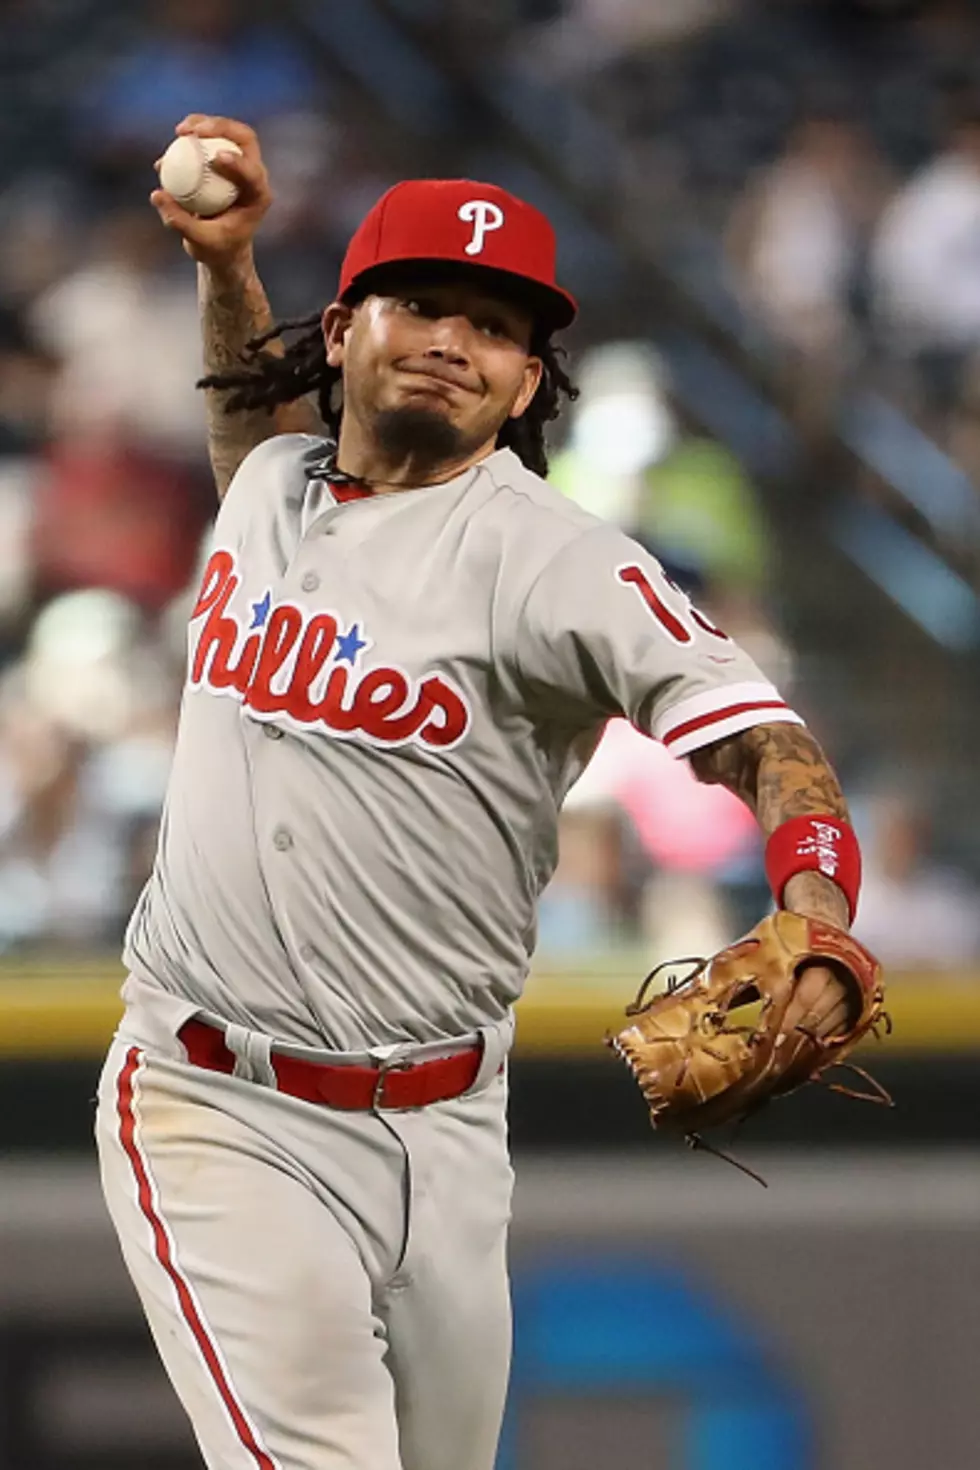 Should Galvis Continue Starting At SS Instead Of Crawford?